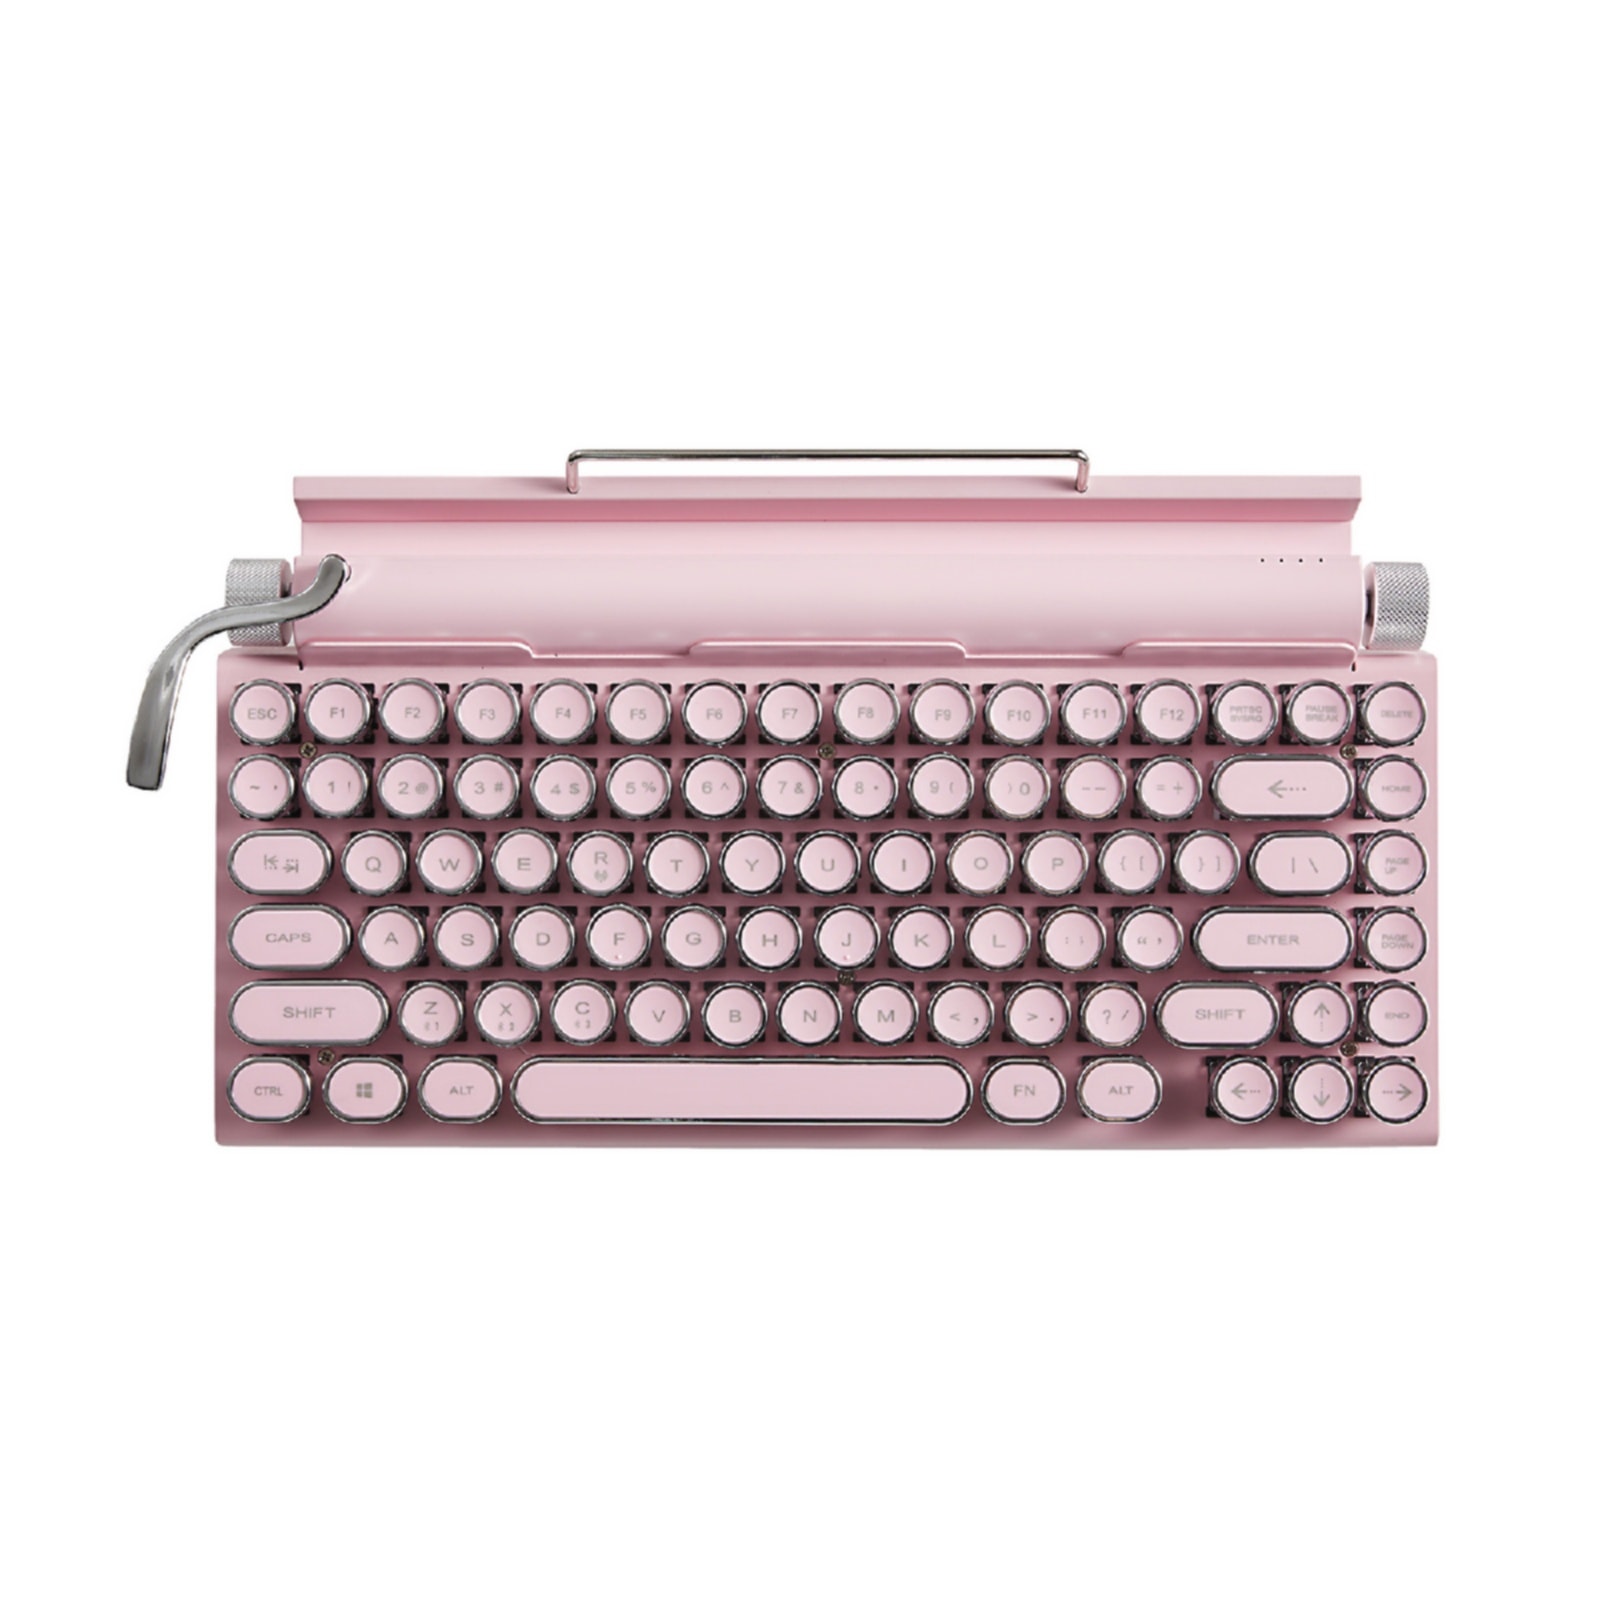 Classic Typewriter Bluetooth Keyboard with Stand - Pink | The PNK Stuff